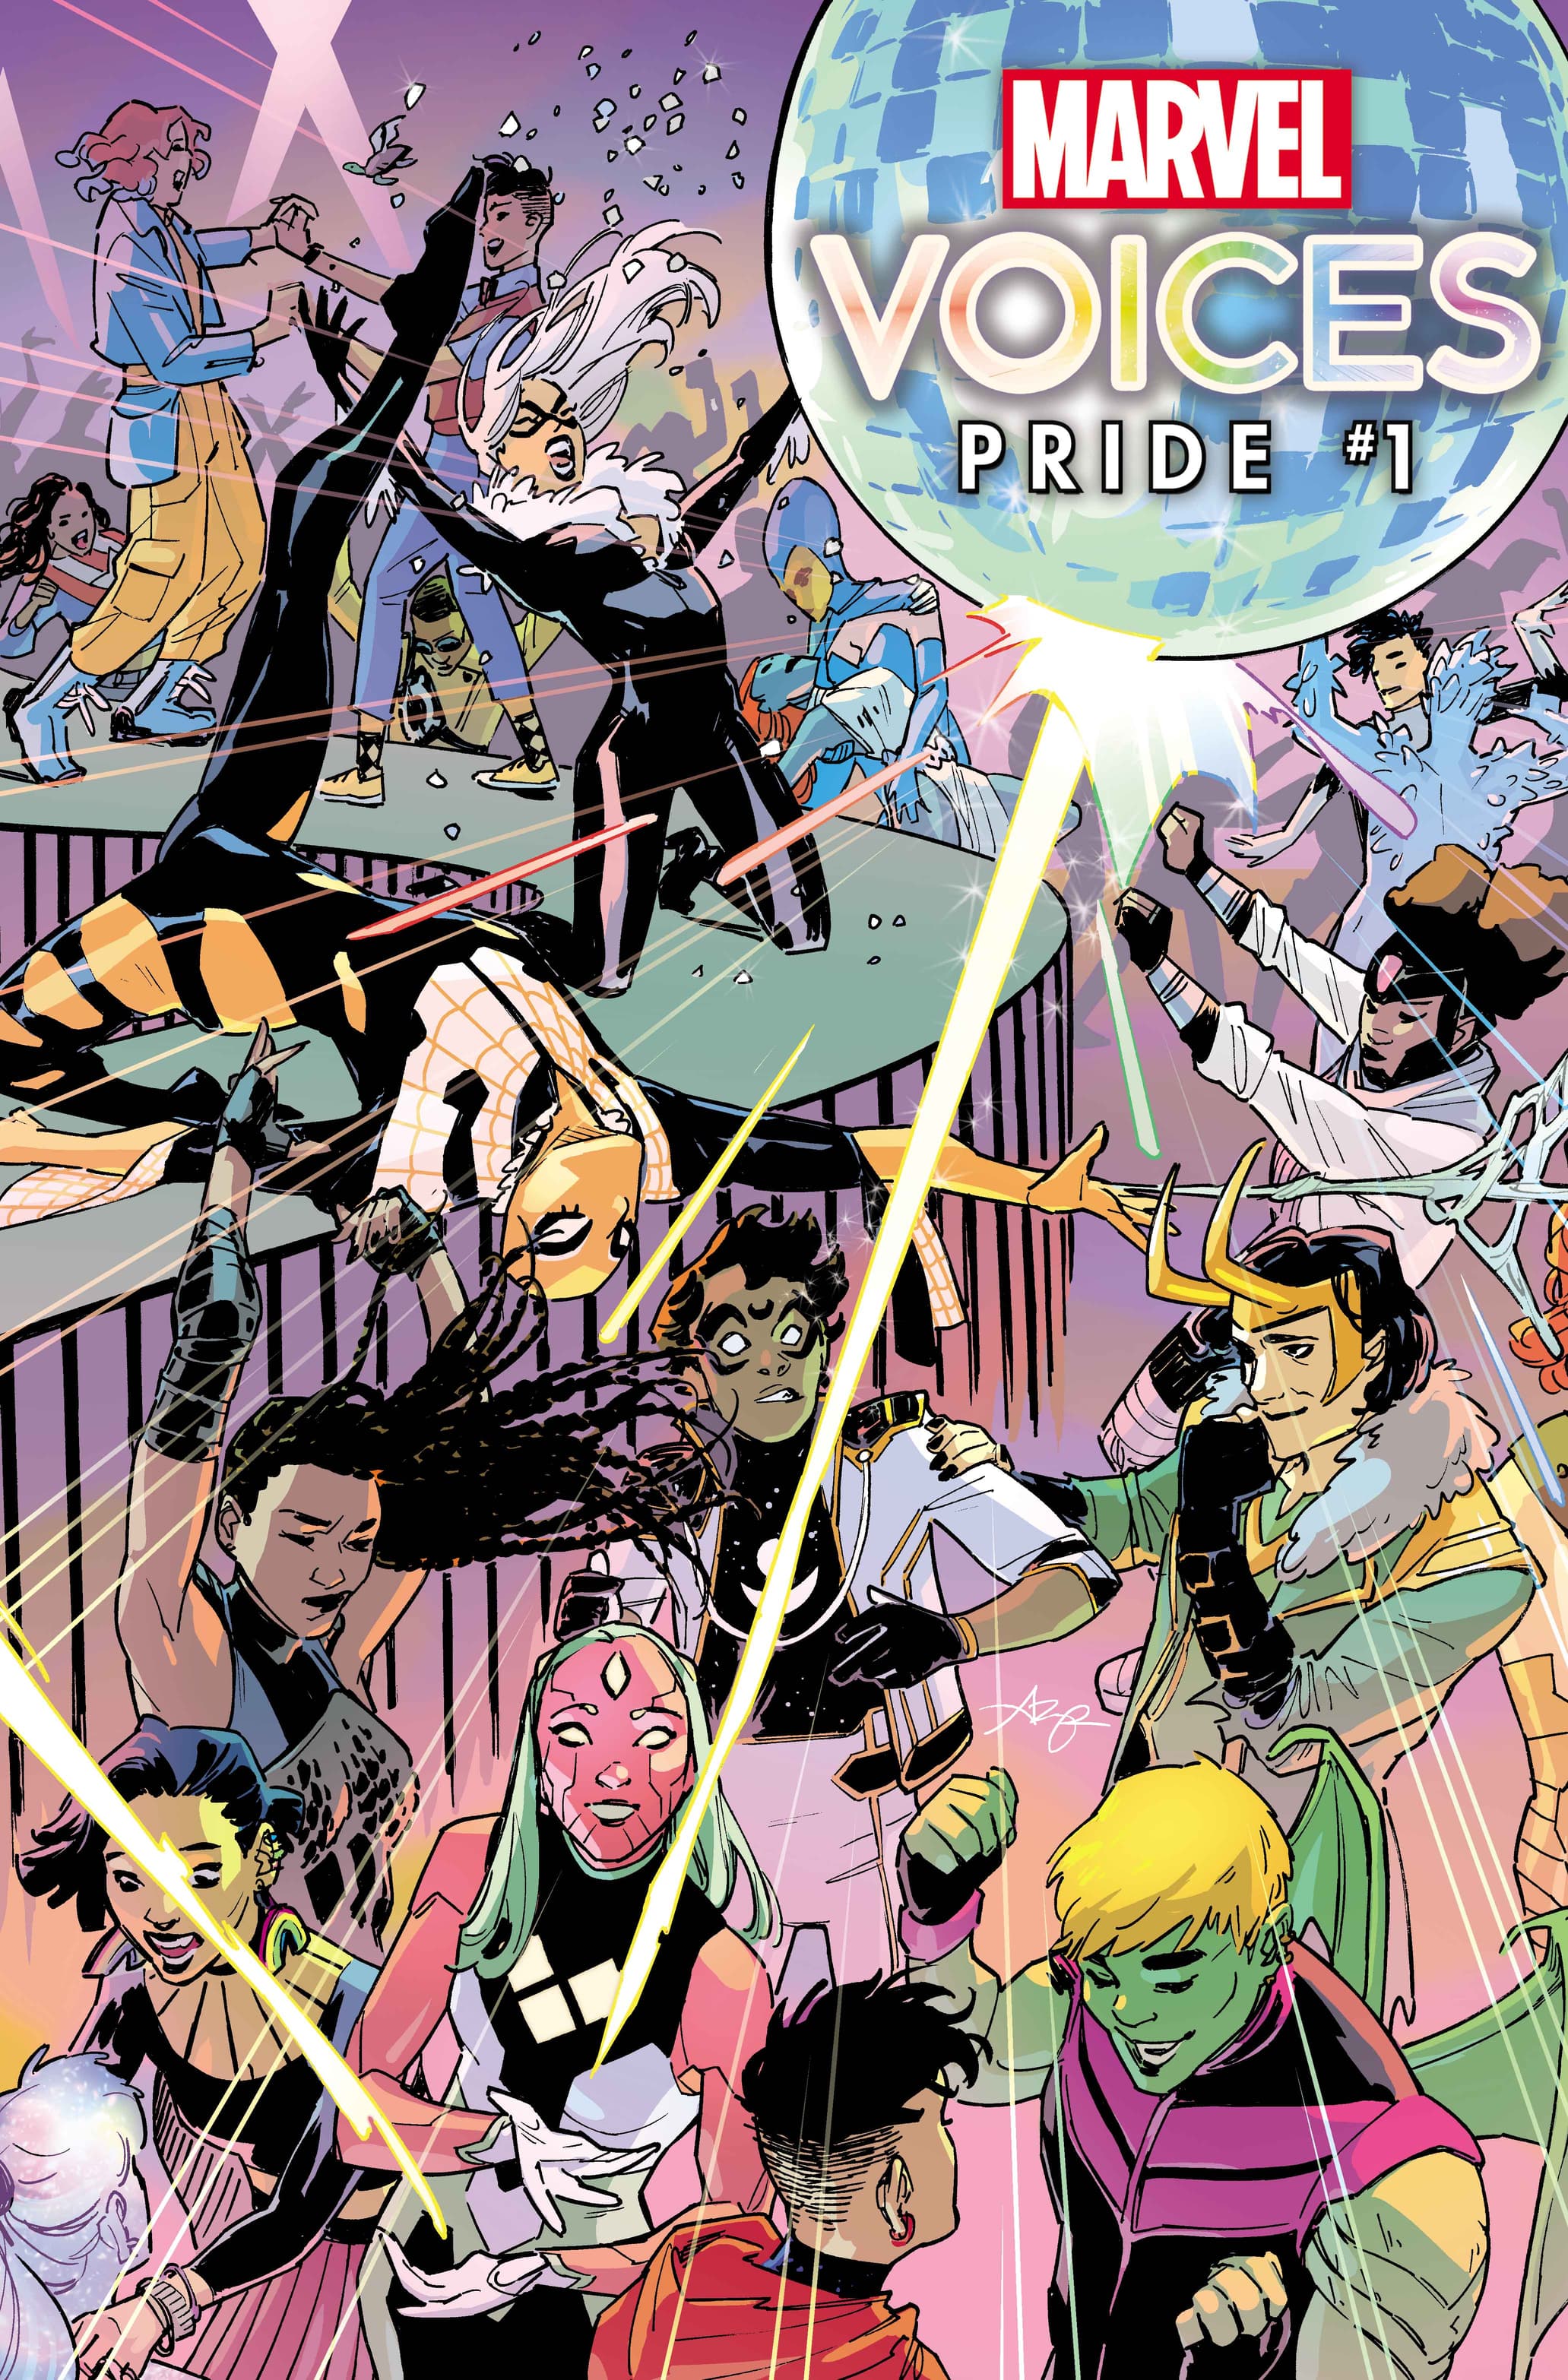 MARVEL'S VOICES: PRIDE #1 cover by Amy Reeder